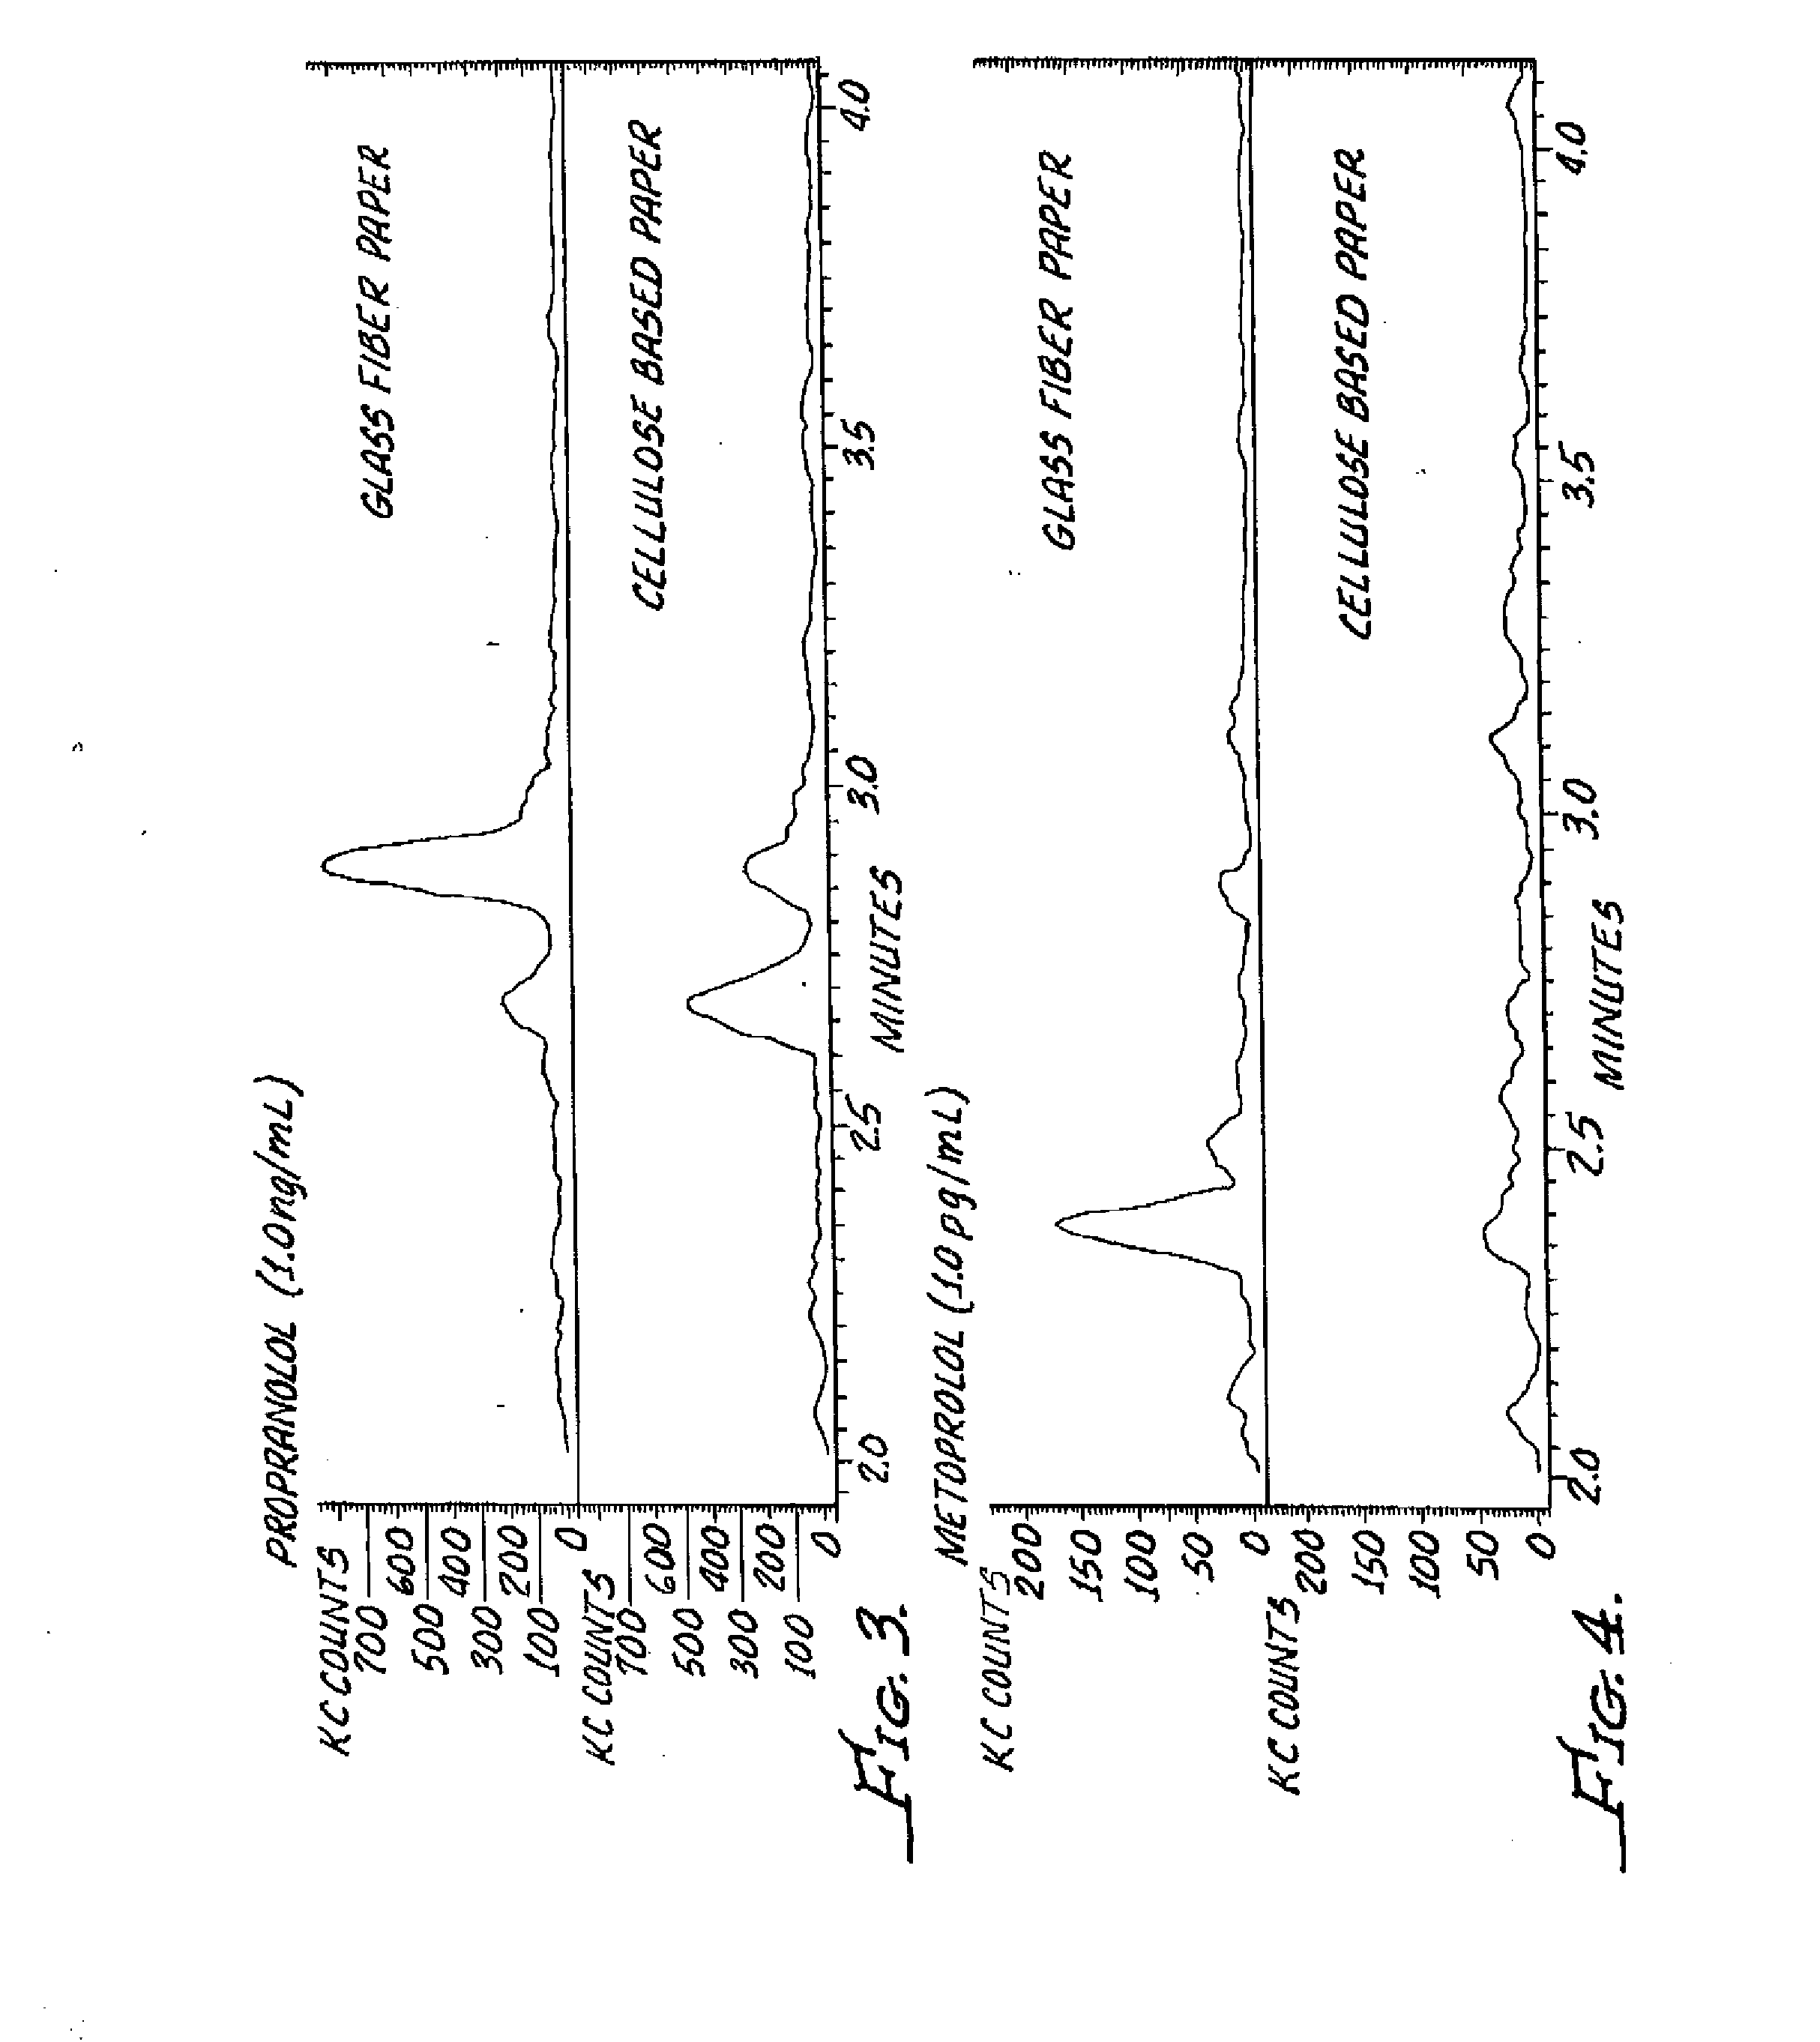 Dried blood spotting paper device and method